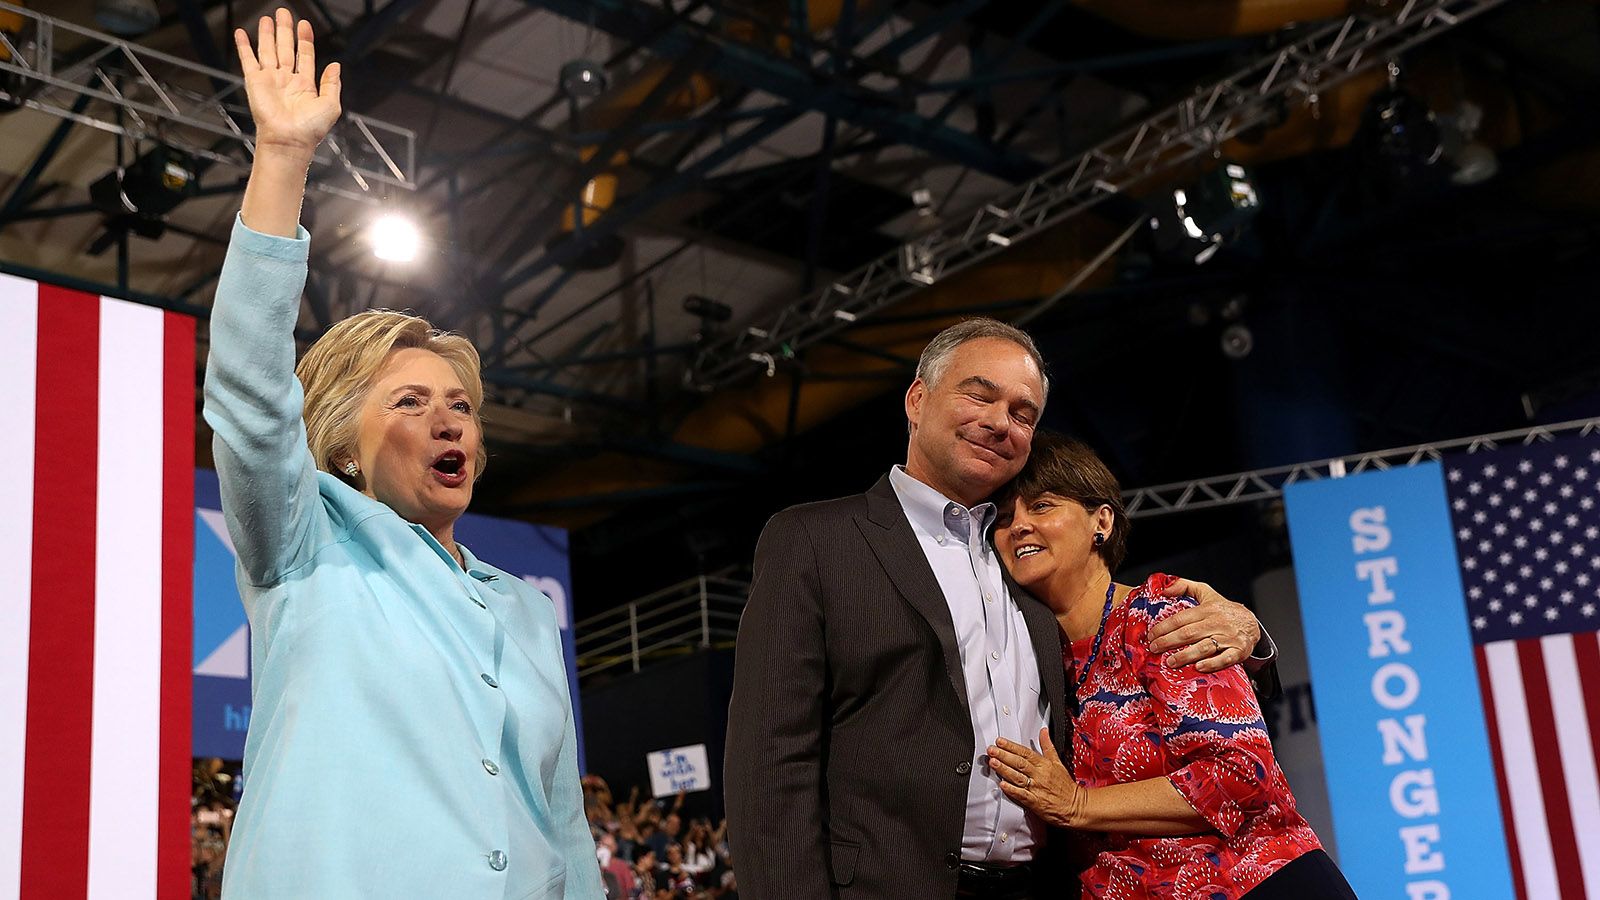 Anne want Kaine's Senate seat: 'I will never let (my) husband be my boss' | CNN Politics